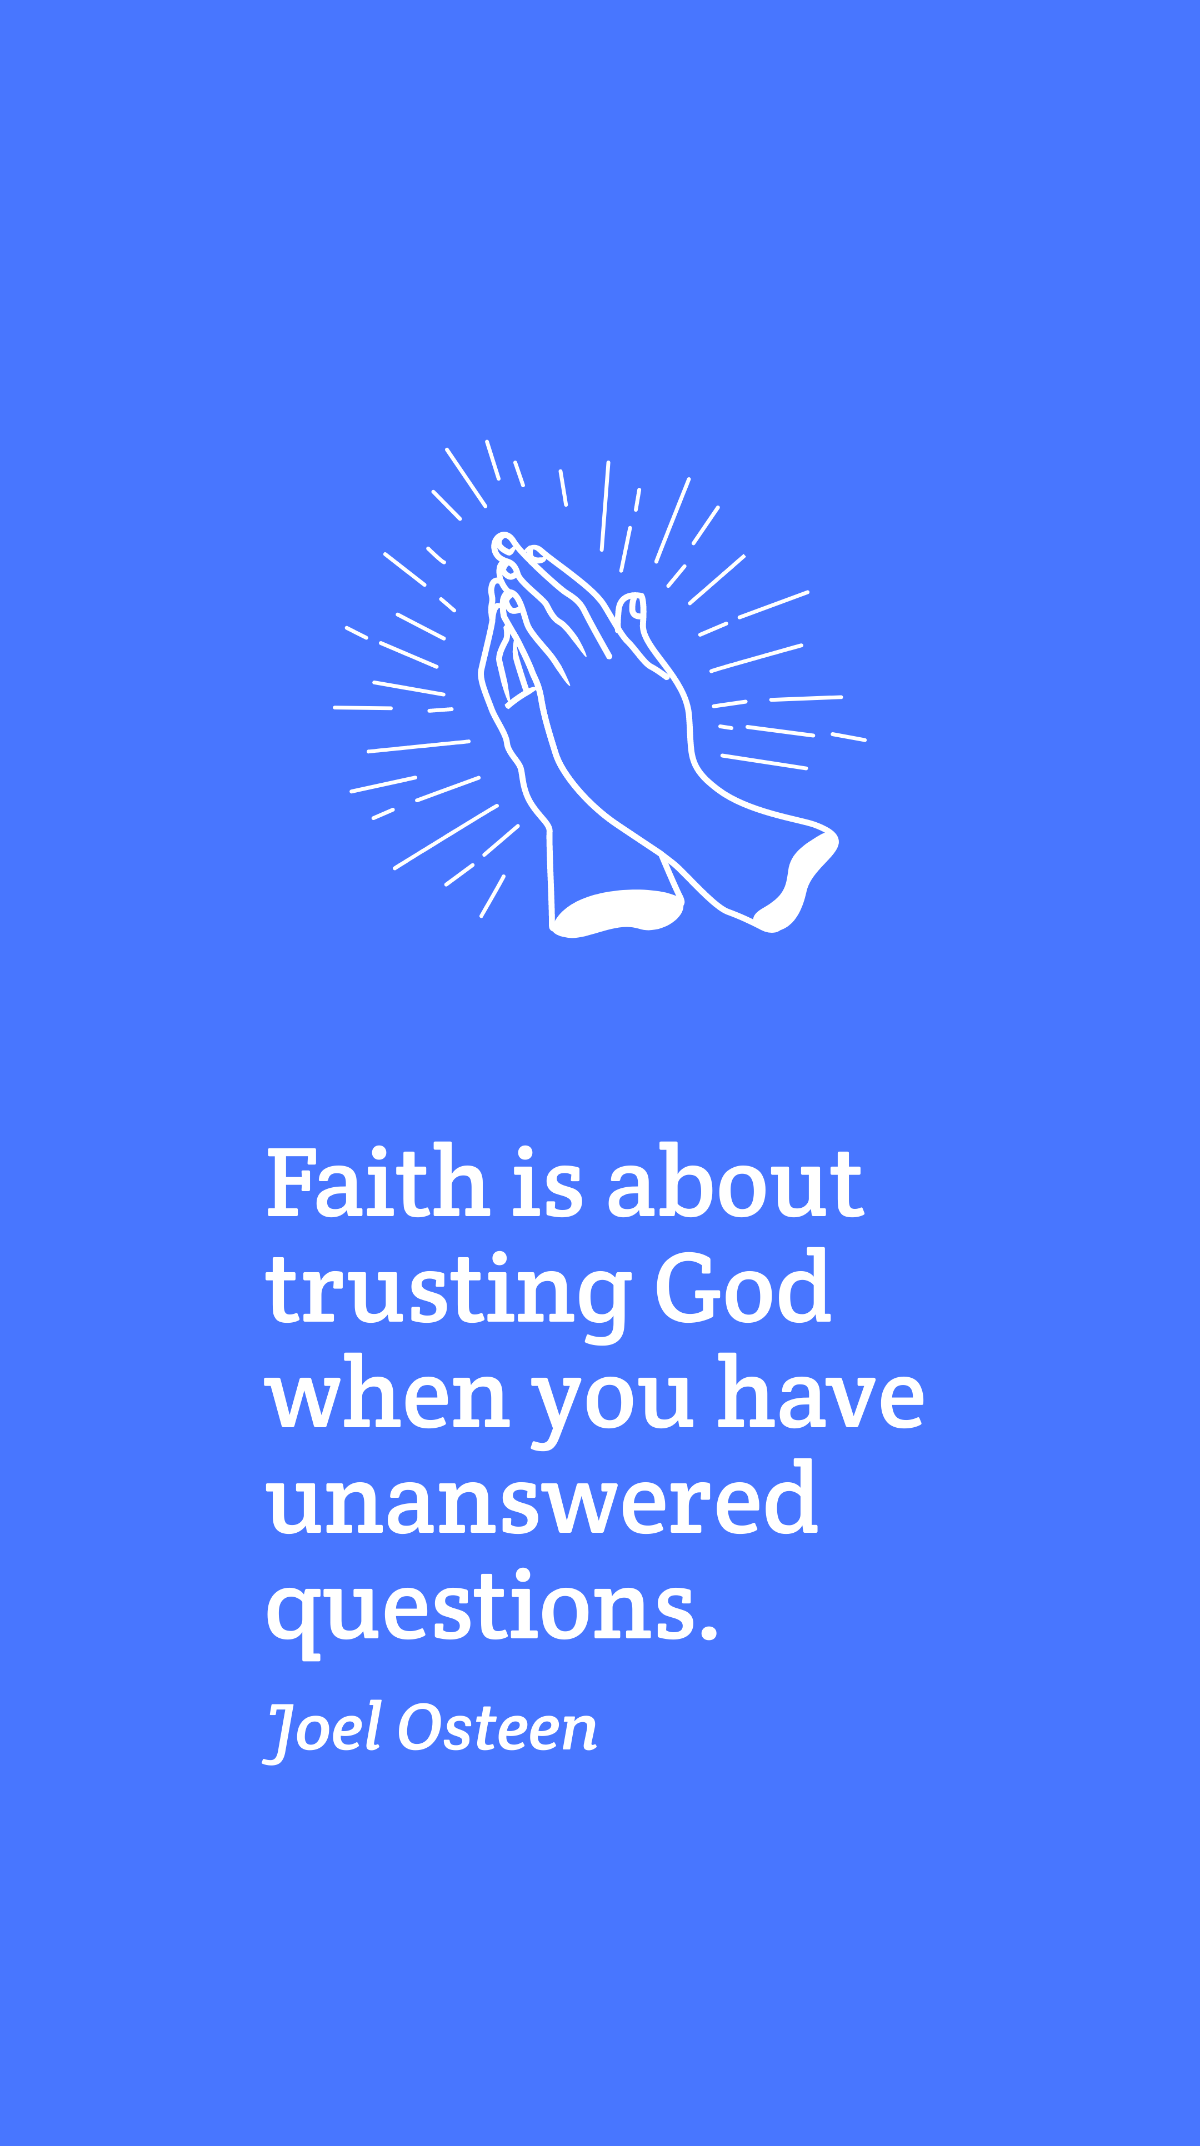 Joel Osteen - Faith is about trusting God when you have unanswered questions.